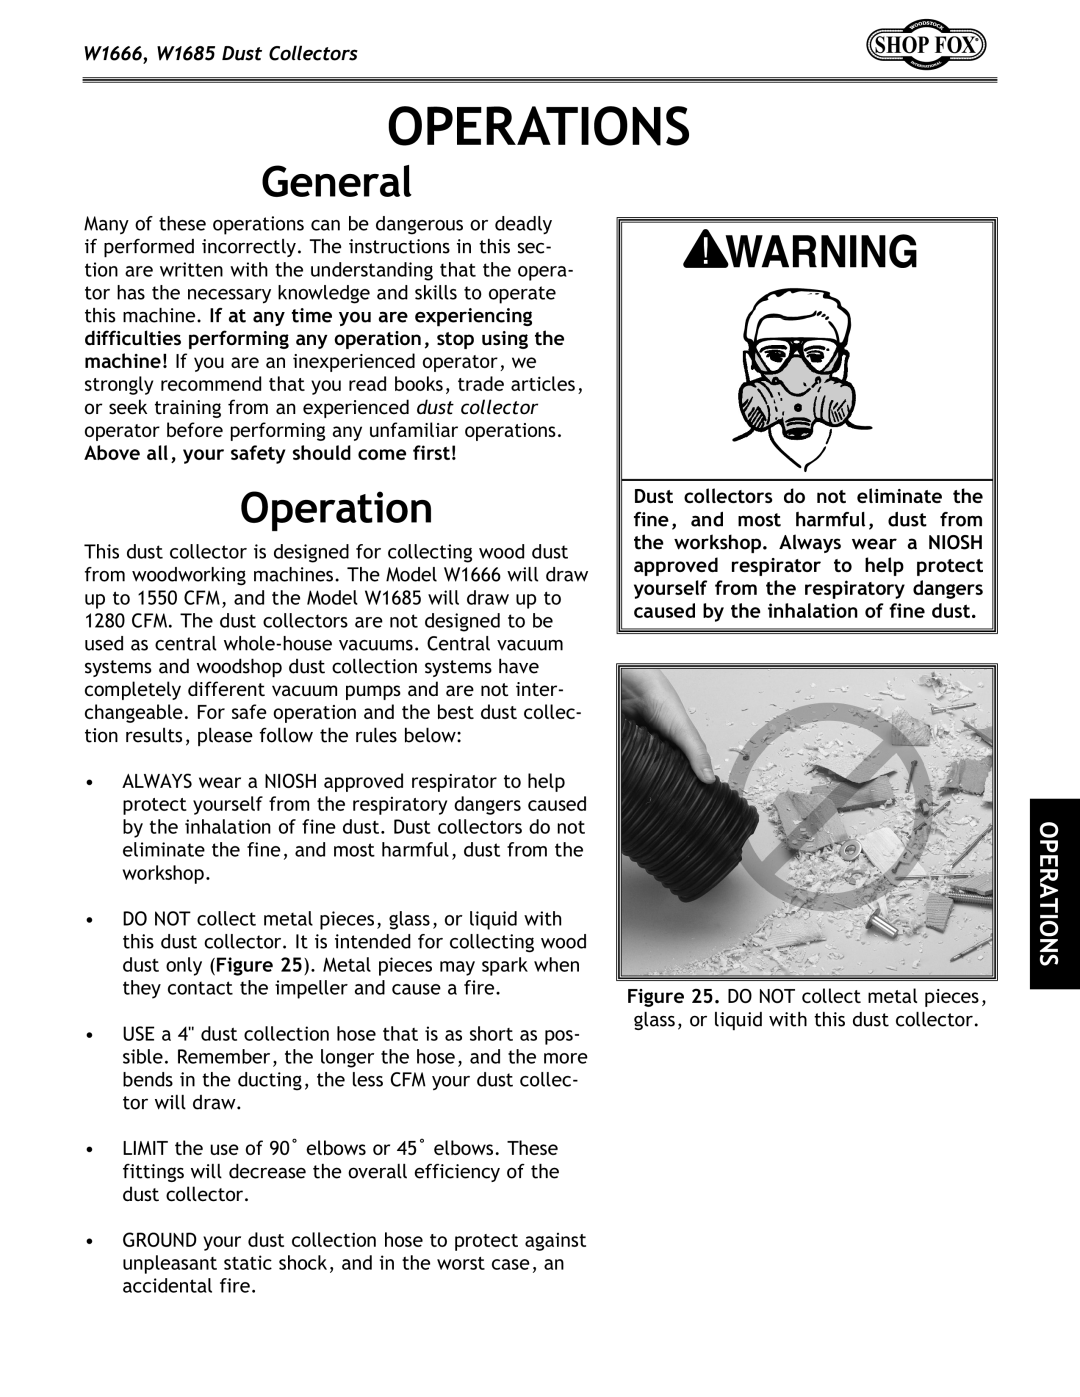 Woodstock DUST COLLECTORS instruction manual Operations, General, W1666, W1685 Dust Collectors 